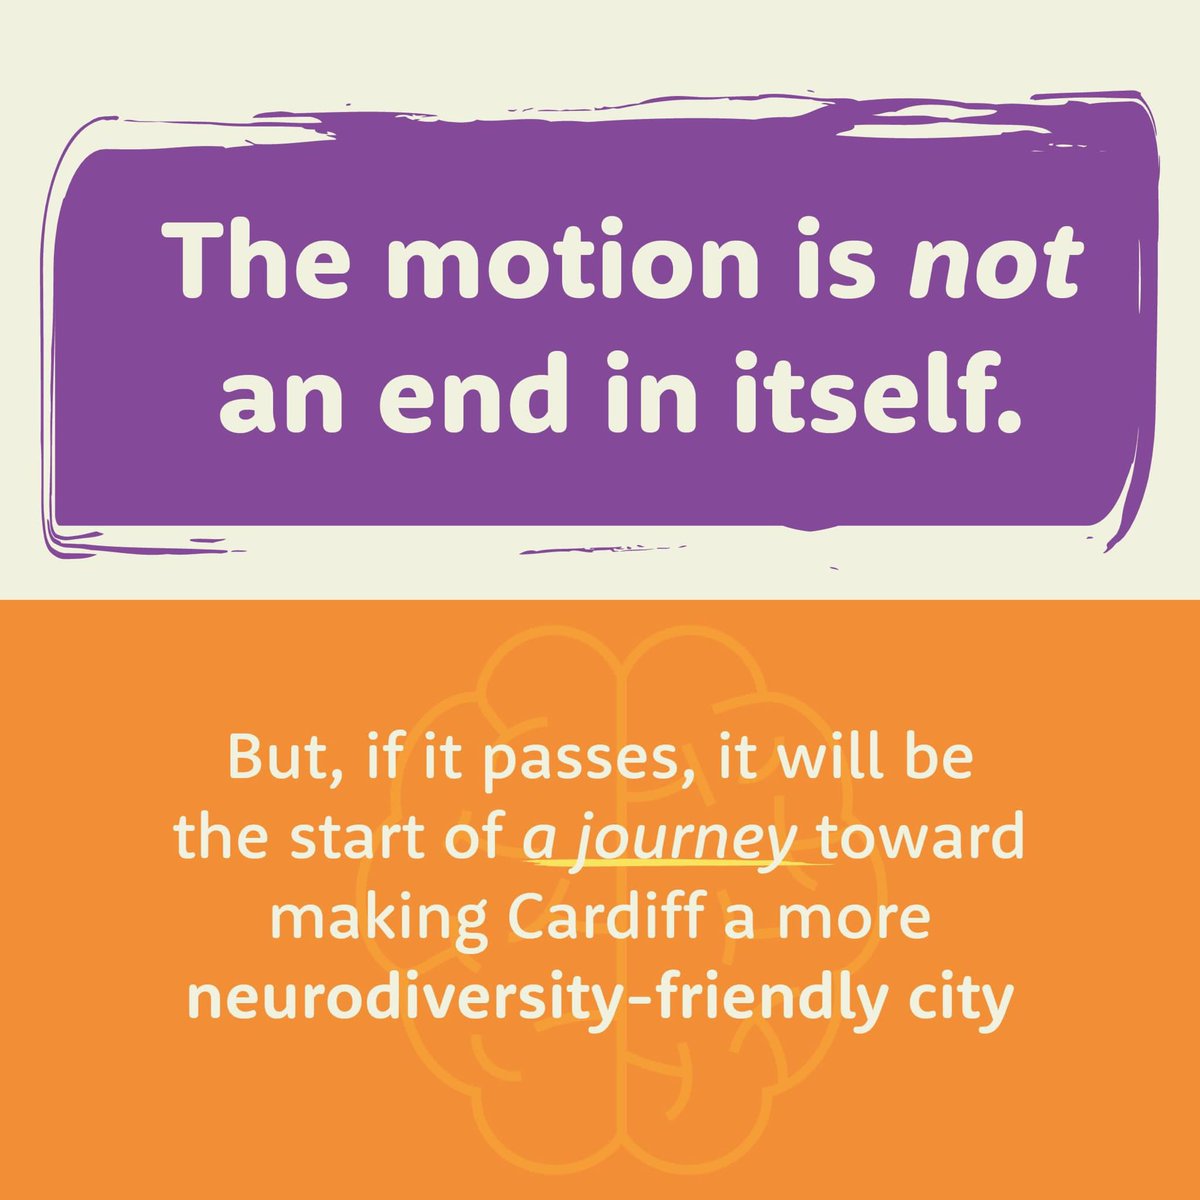 Did you know an estimated 1 in 5 people are neurodivergent? Tonight @cardiff_council will debate a motion from @JGreen_CDF & Cllr Sara Robinson on making Cardiff a neurodiversity-friendly city. Want to find out more? Here’s an explainer! #neurodiversity #neurodivergent